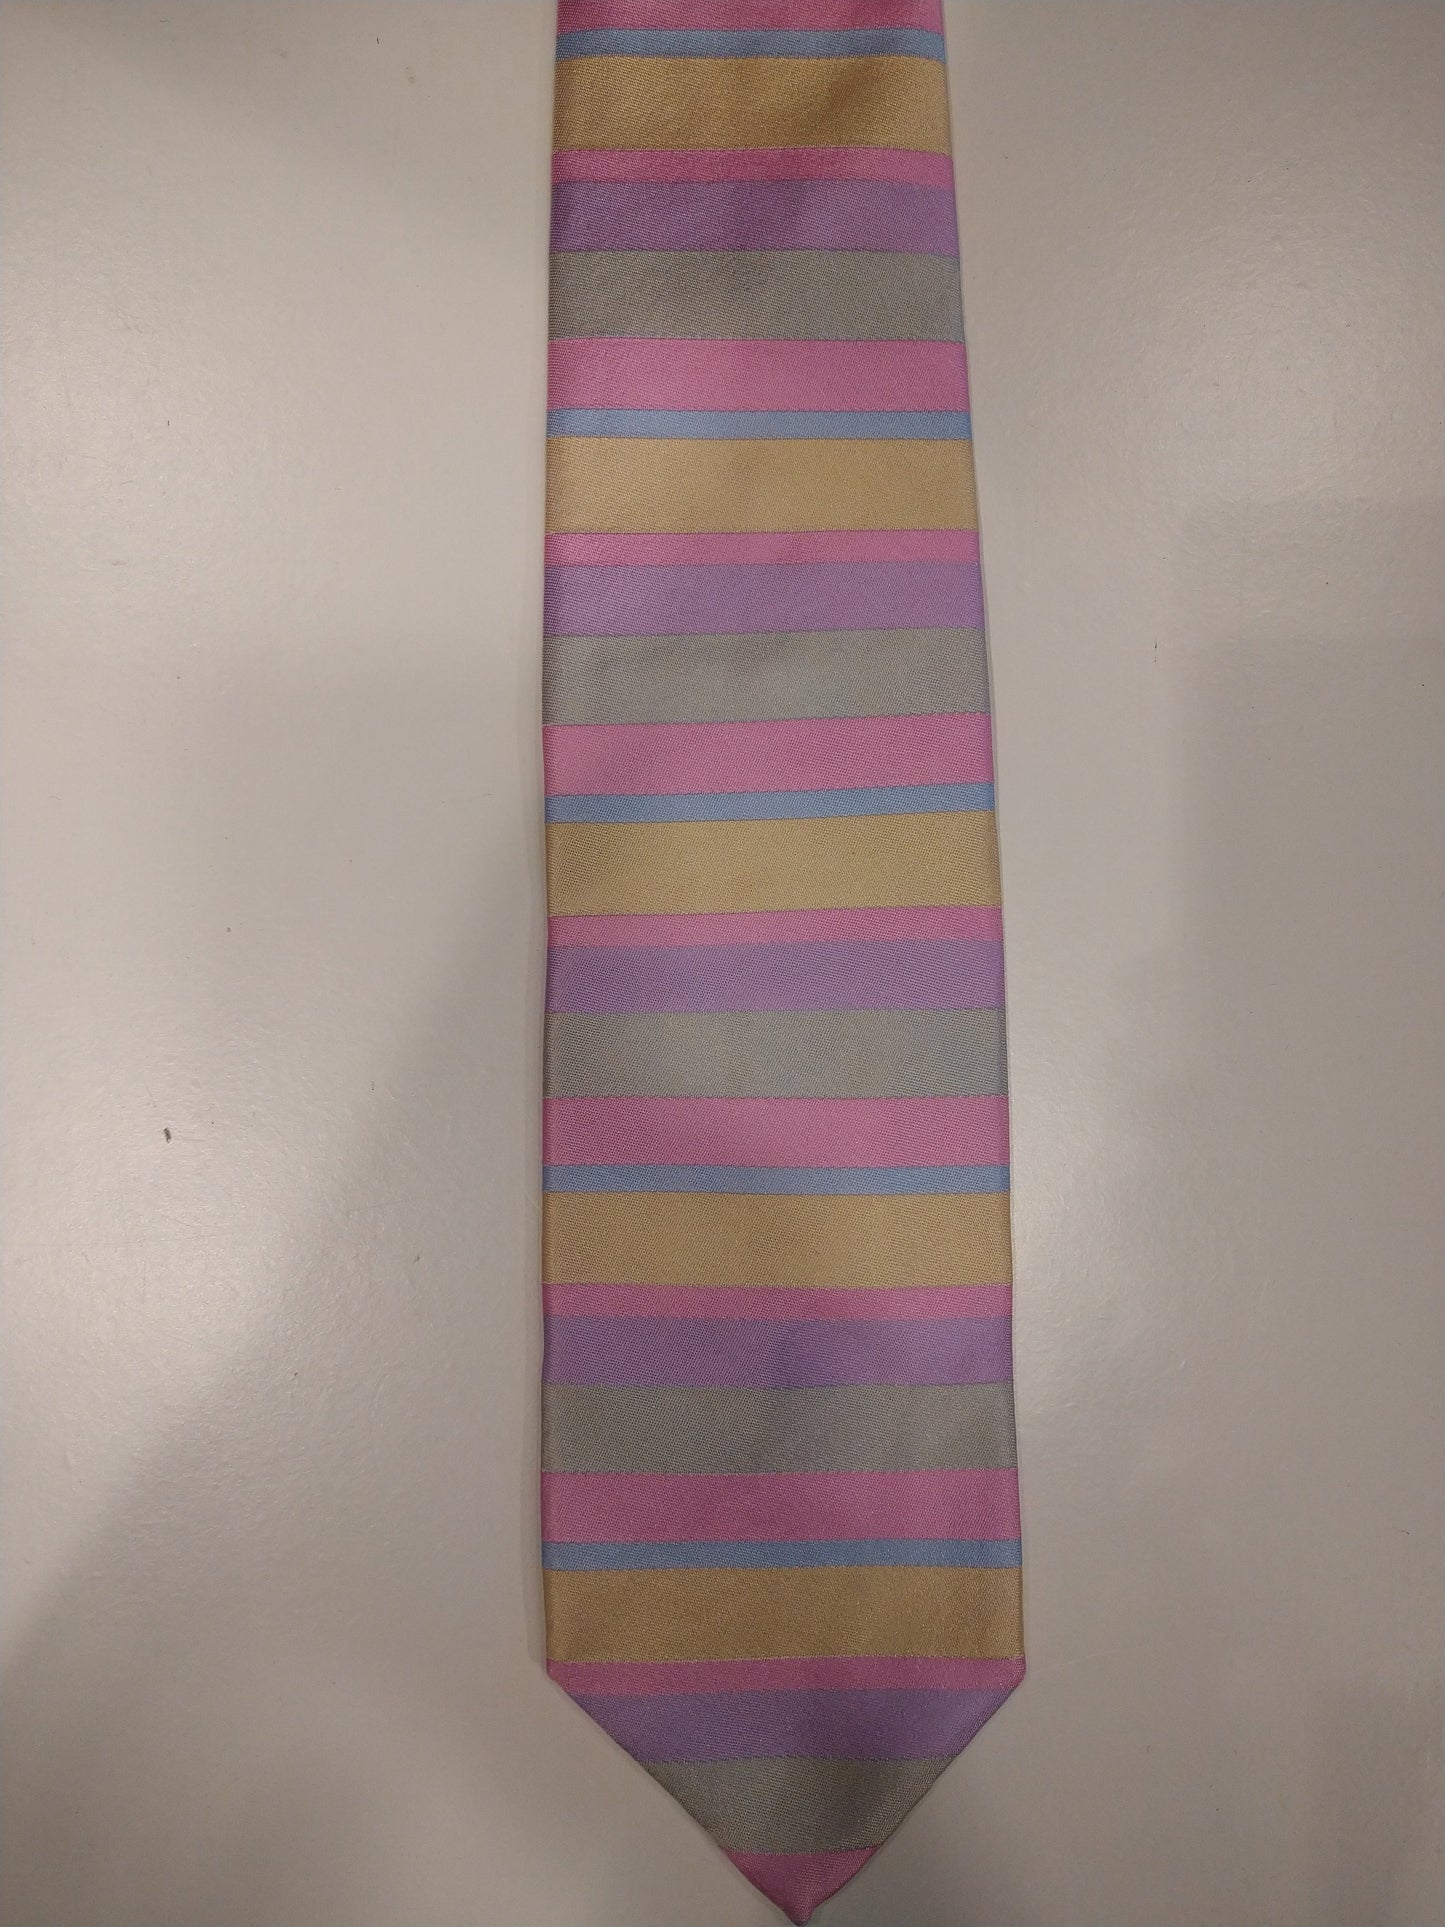 Jay Pee's hand made in como silk tie. Pink / purple / blue / yellow striped.